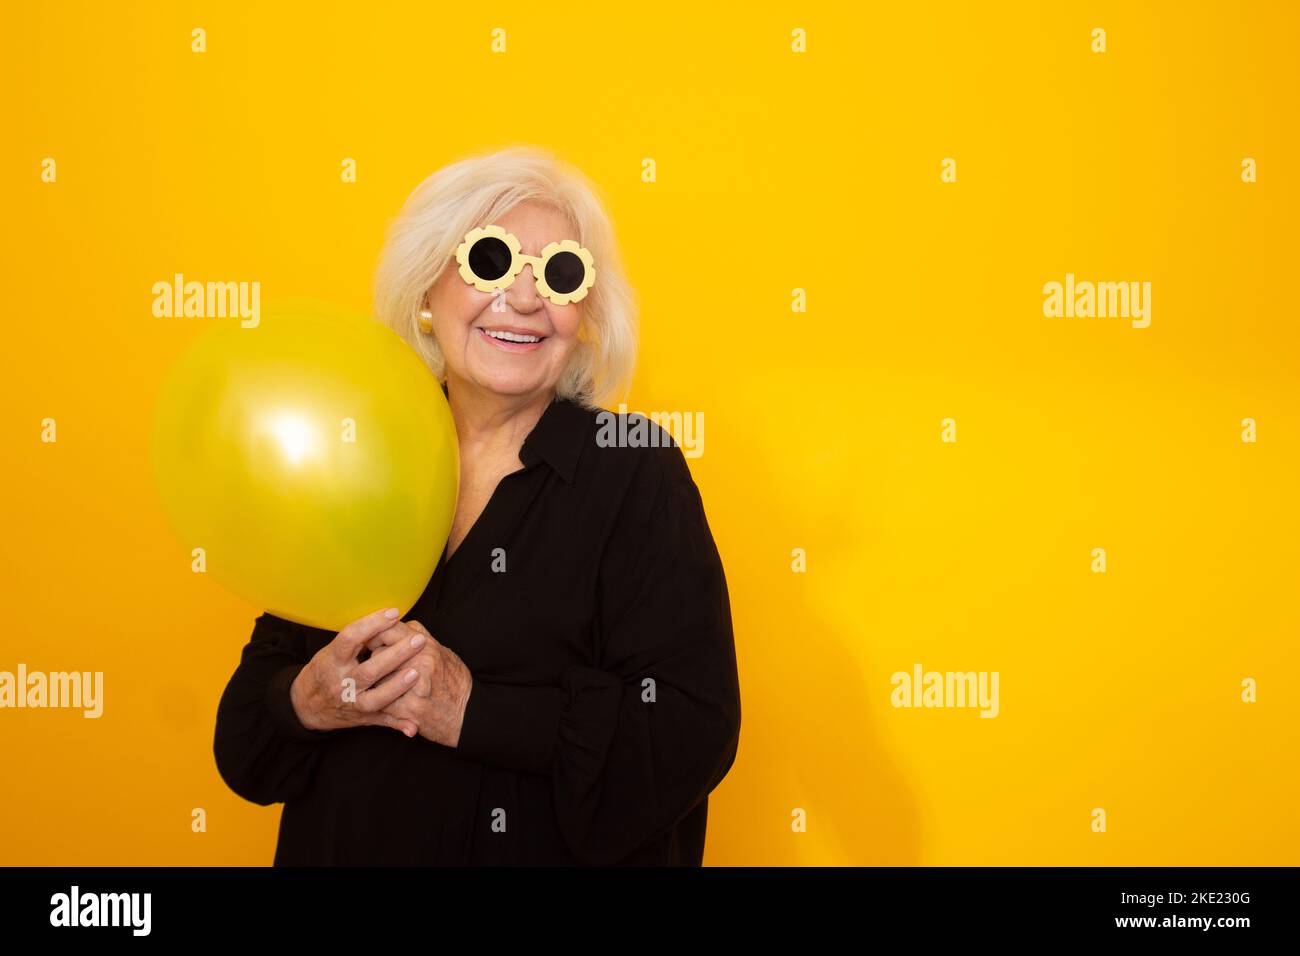 older woman smiling with funny sunglasses holding a balloon Stock Photo